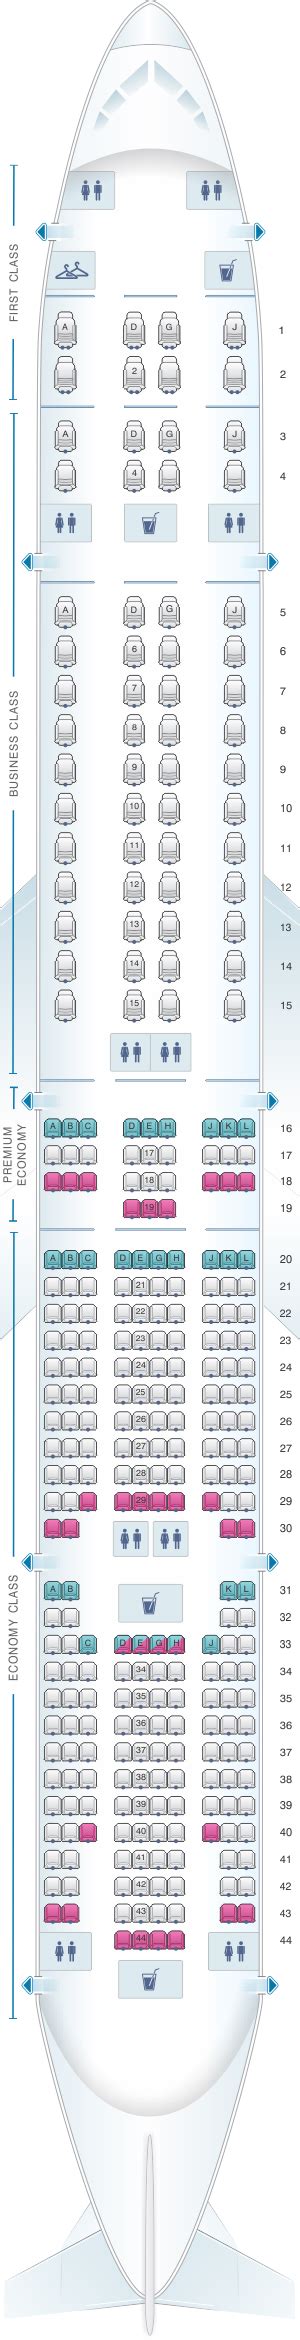 Boeing 777 300er seat map american airlines. Seat Map and Seating Chart Boeing 777 300ER American Airlines. First class includes 8 bed seats situated in 2 rows per 4 seats in each. All the seats are standard except the seats 1G and 1J. Passengers of these seats may feel discomfort because of the light from the galley. Business class may accommodate 52 passengers in its’ flat bed seats. 